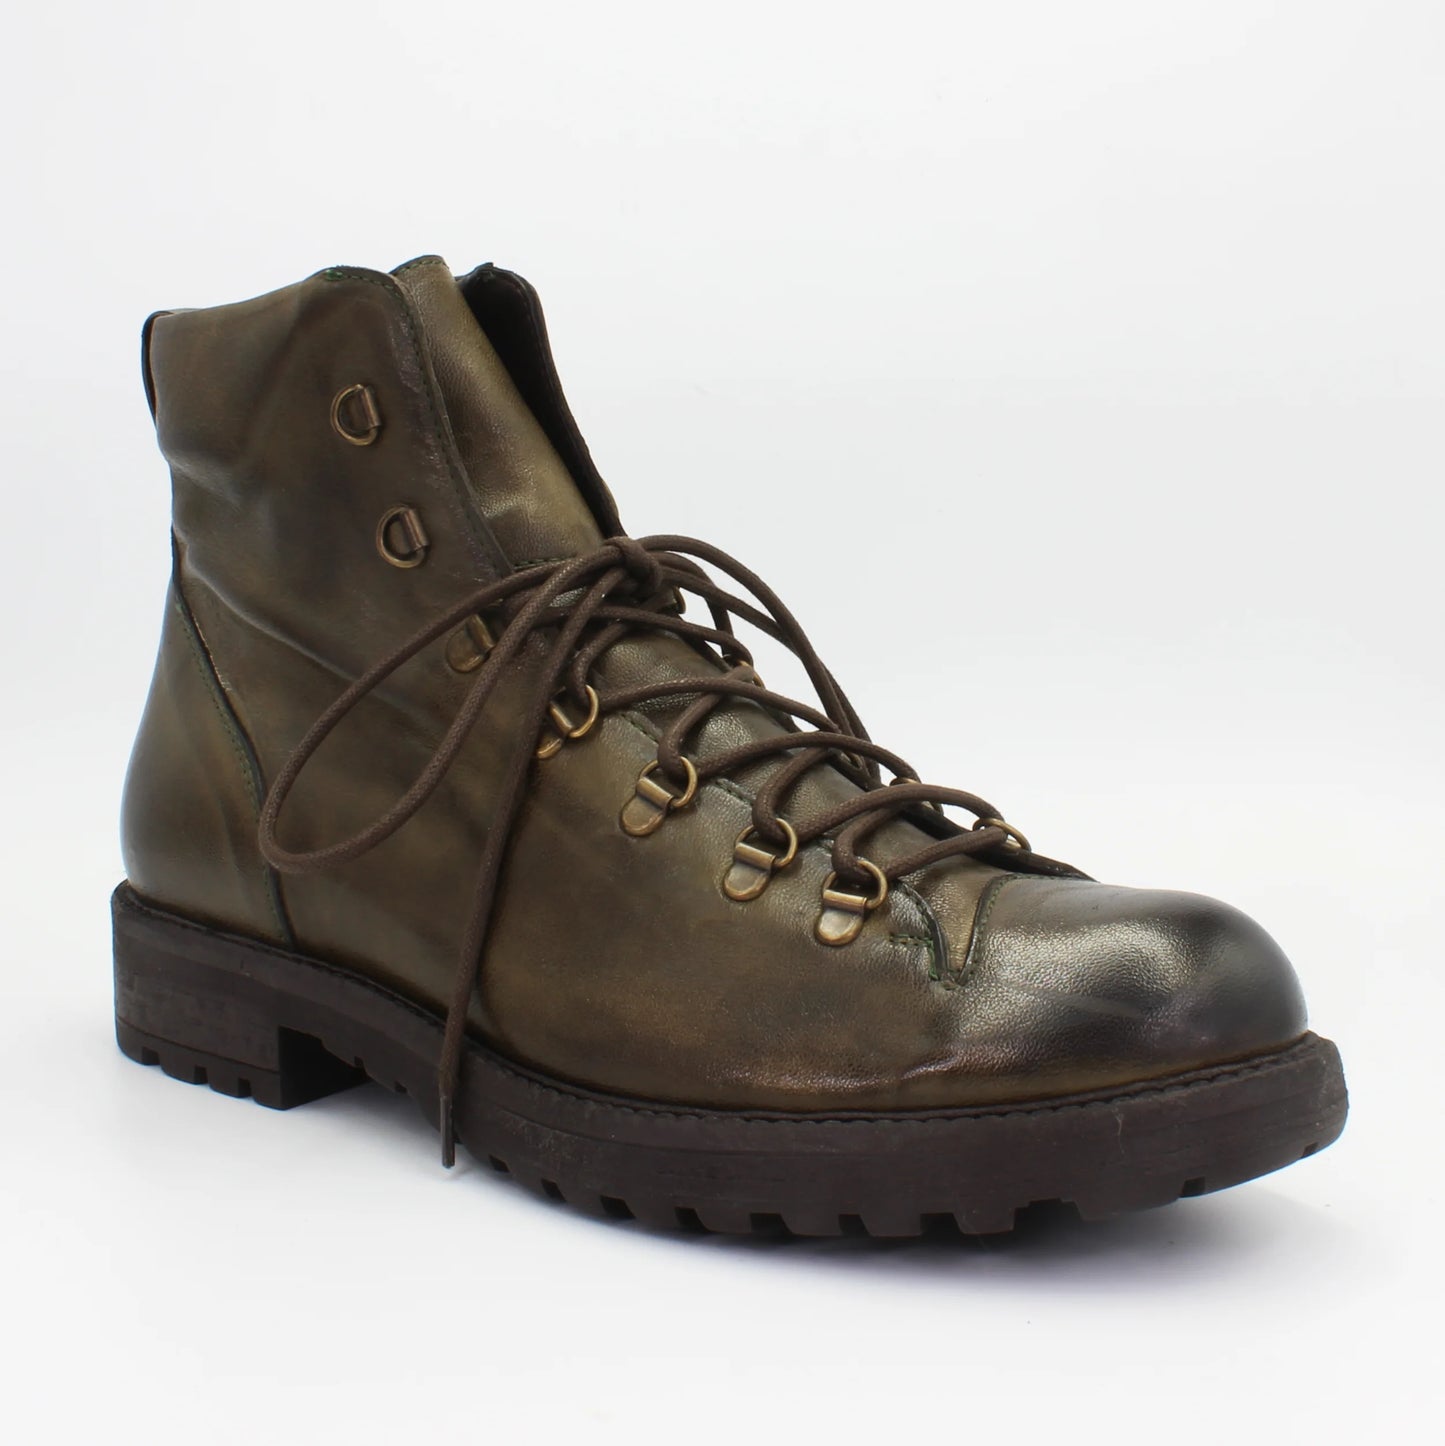 Shop Handmade Italian Leather Military Boot in Militare  (JP3830/350) or browse our range of hand-made Italian boots for men in leather or suede in-store at Aliverti Cape Town, or shop online. We deliver in South Africa & offer multiple payment plans as well as accept multiple safe & secure payment methods.